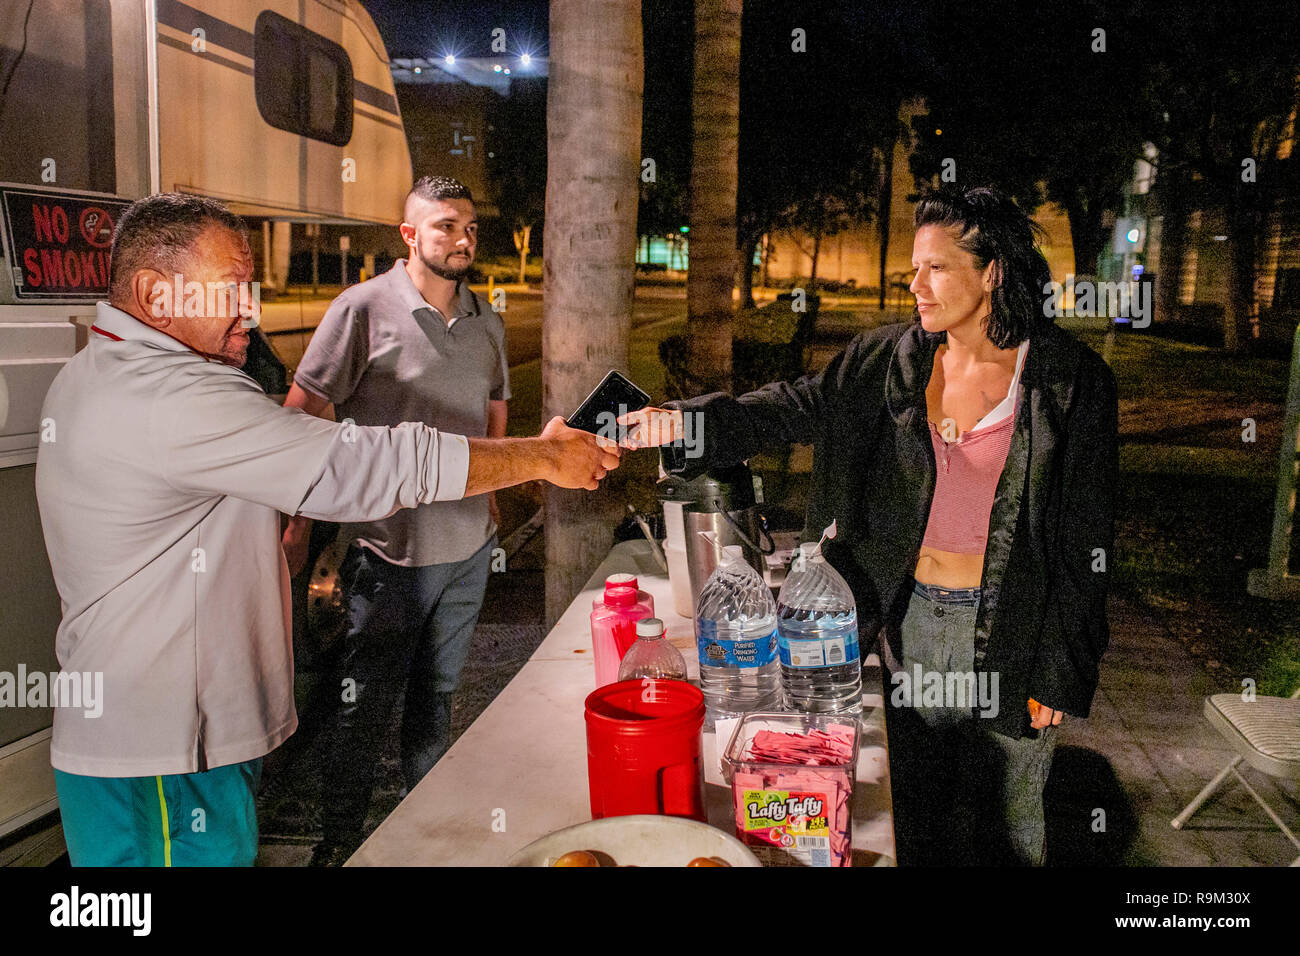 Outside a specialized van, Caucasian and Hispanic volunteers serve free food and supply cell phones to released county jail inmates on a street at night in Santa Ana, CA. Stock Photo